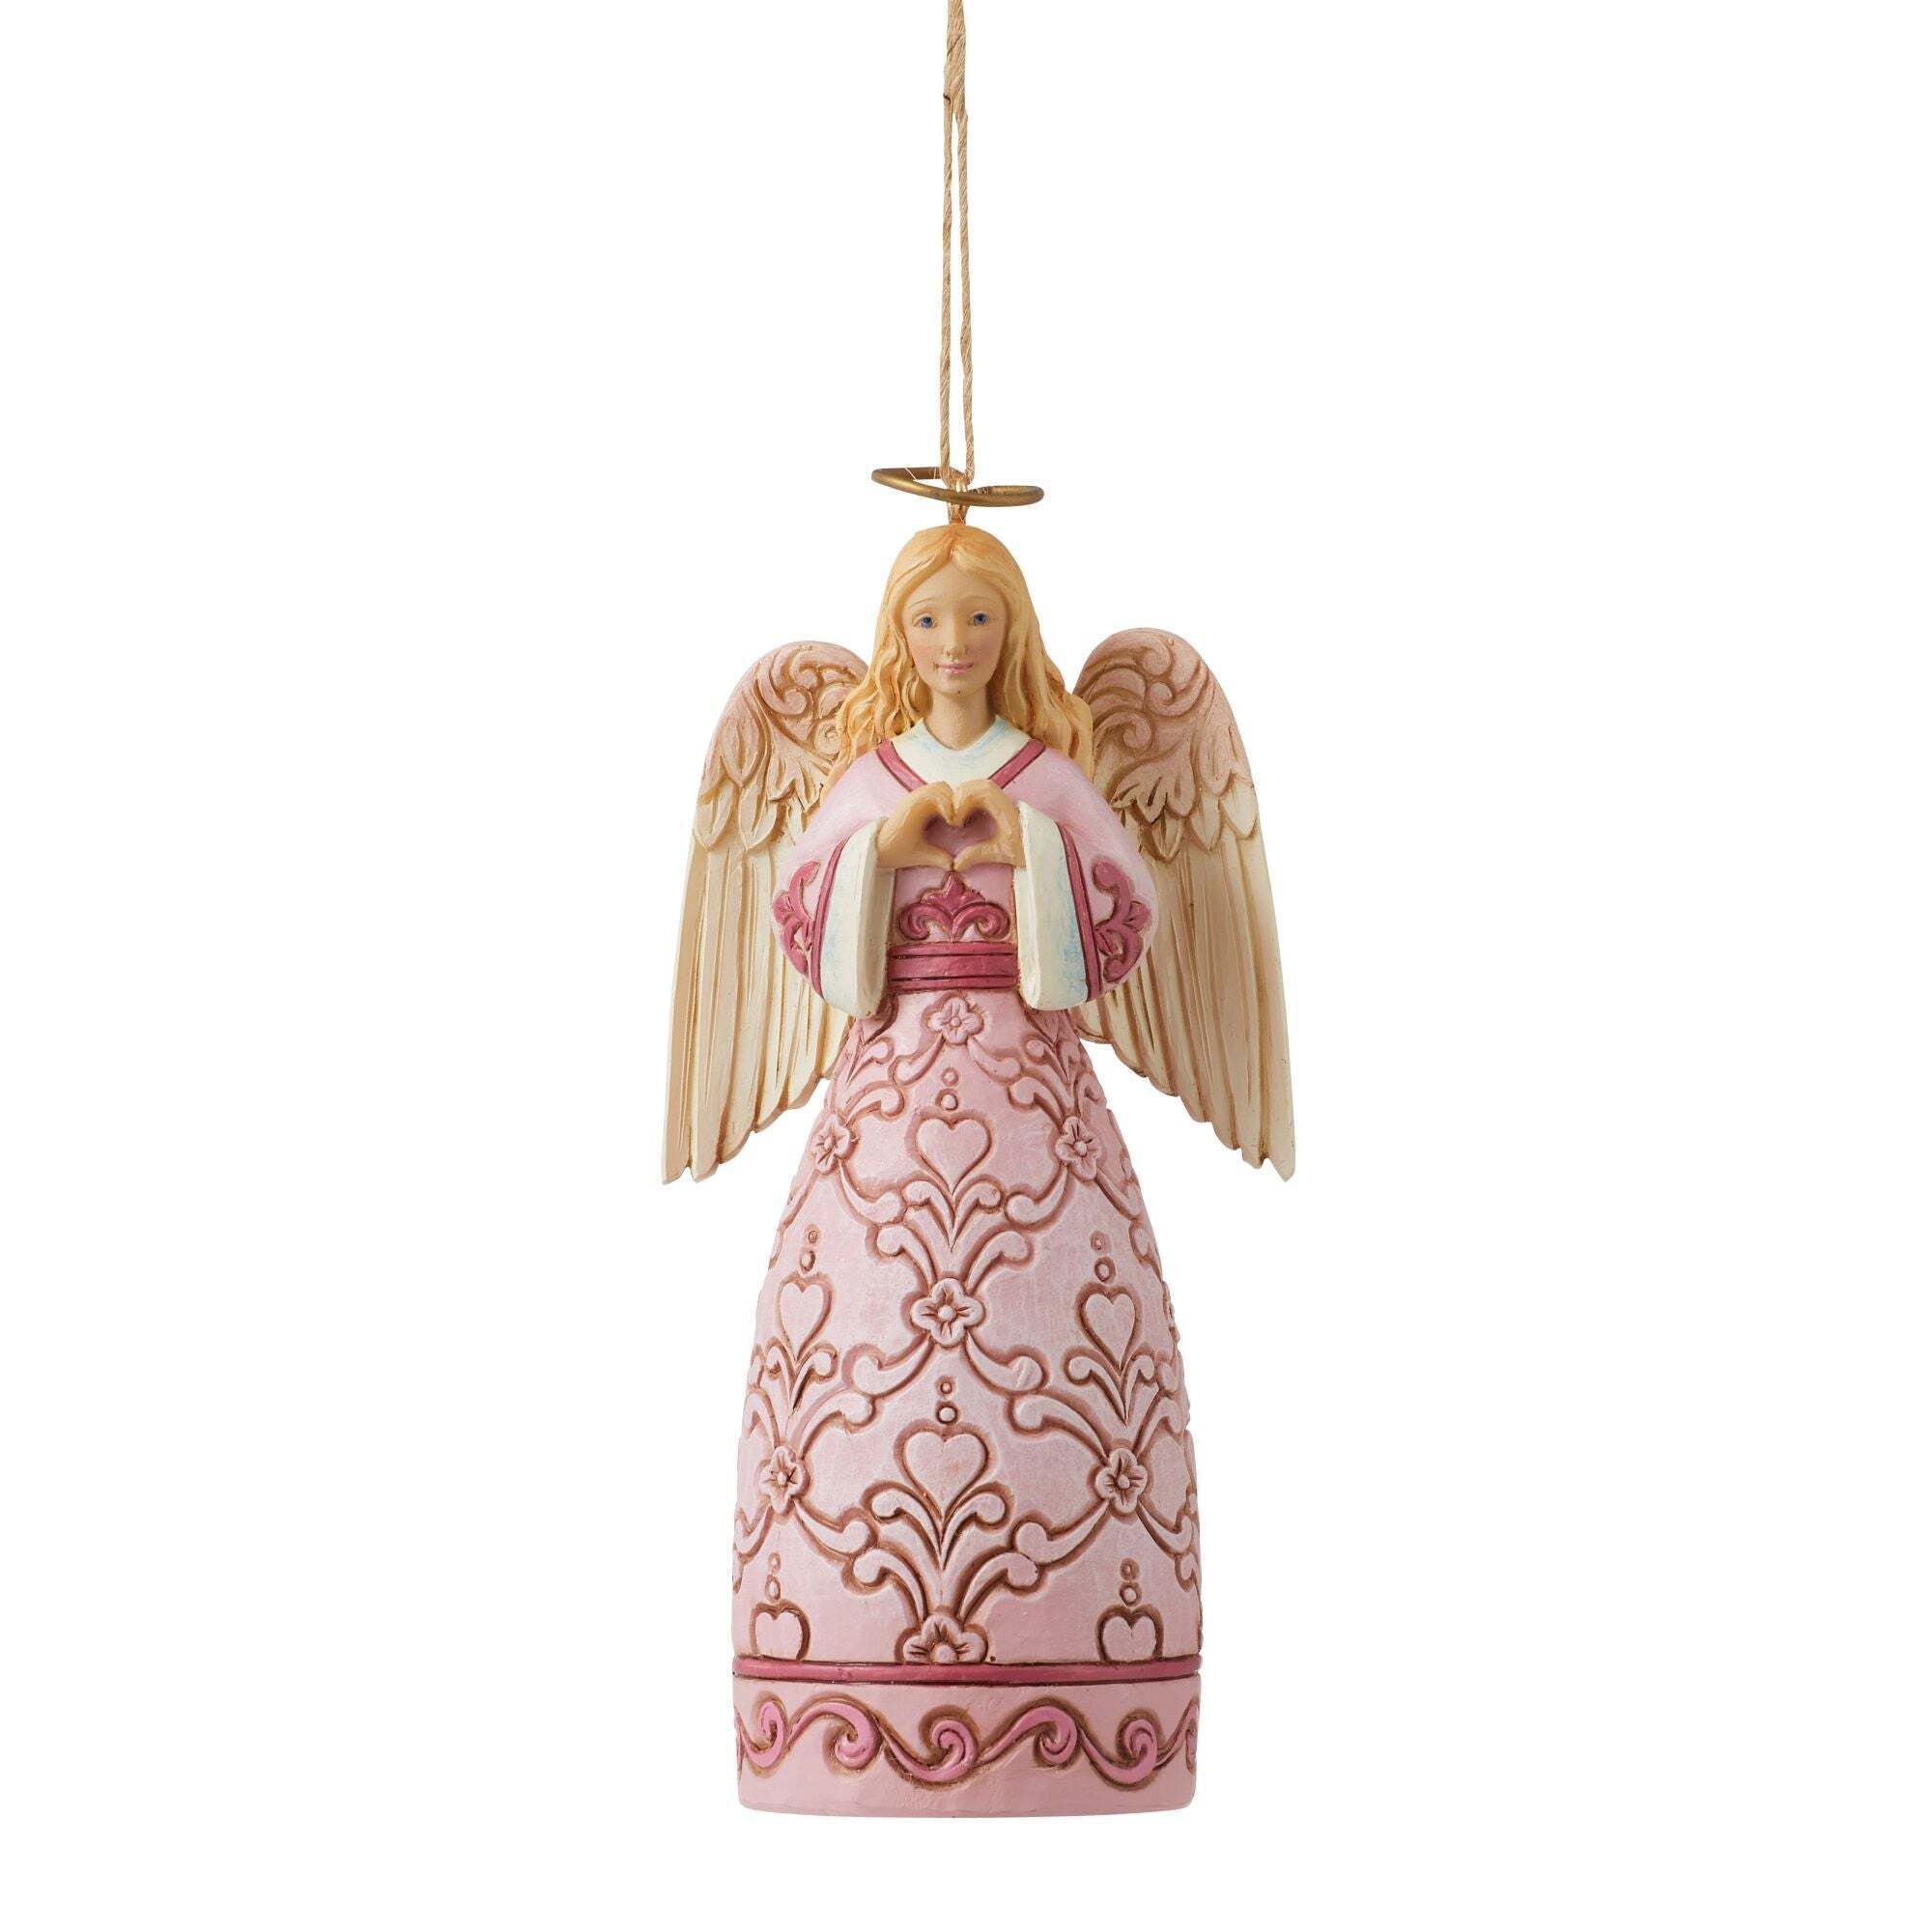 The Rose Pink Angel Ornament